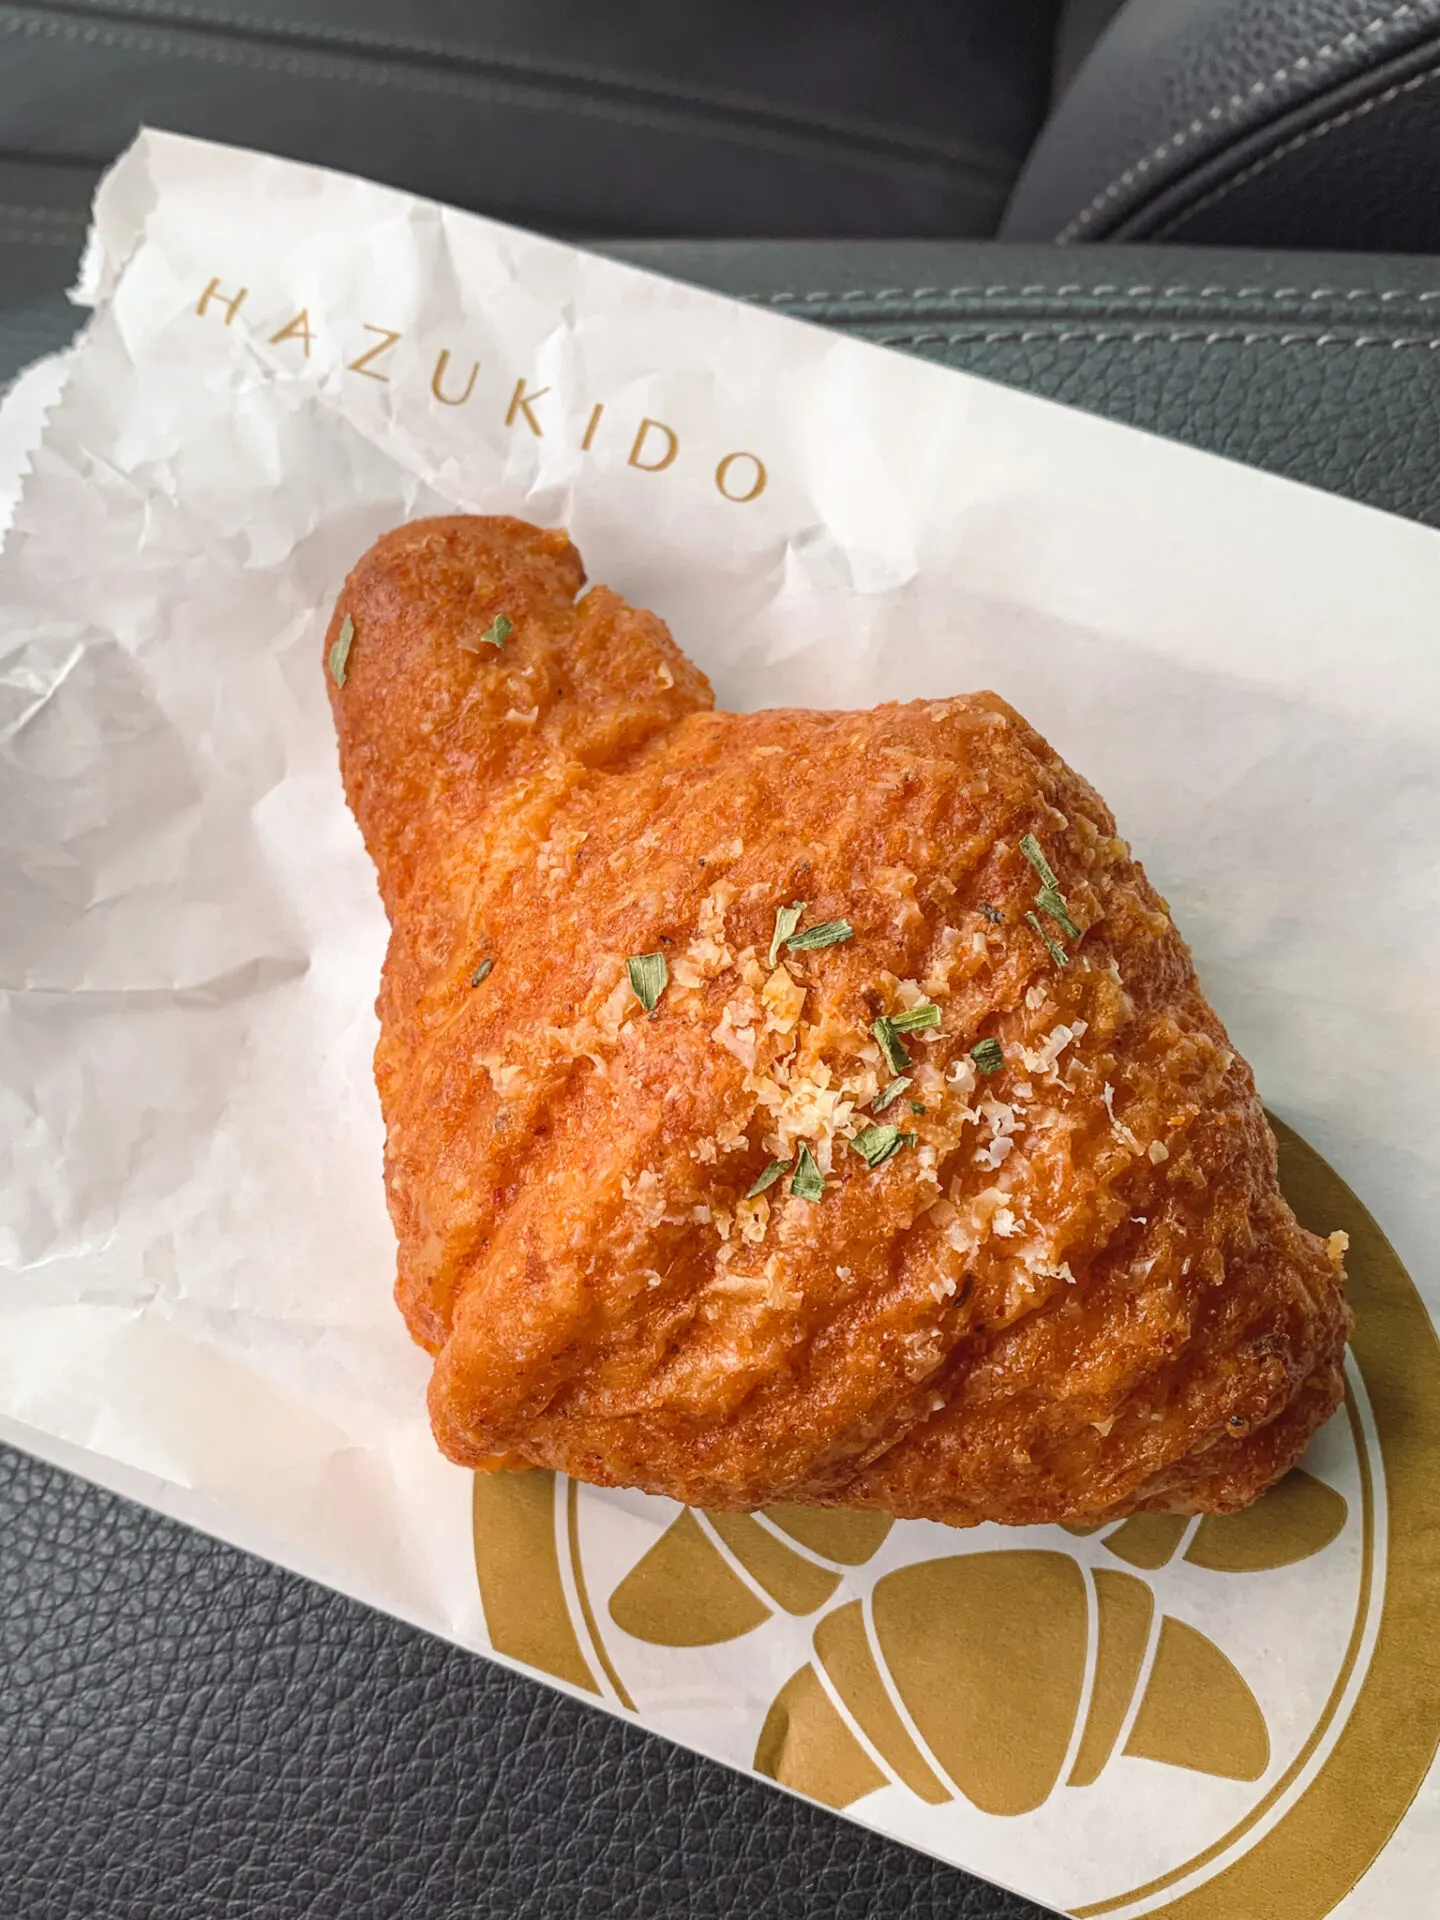 Spicy Cod Roe Croissant from Hazukido Canada